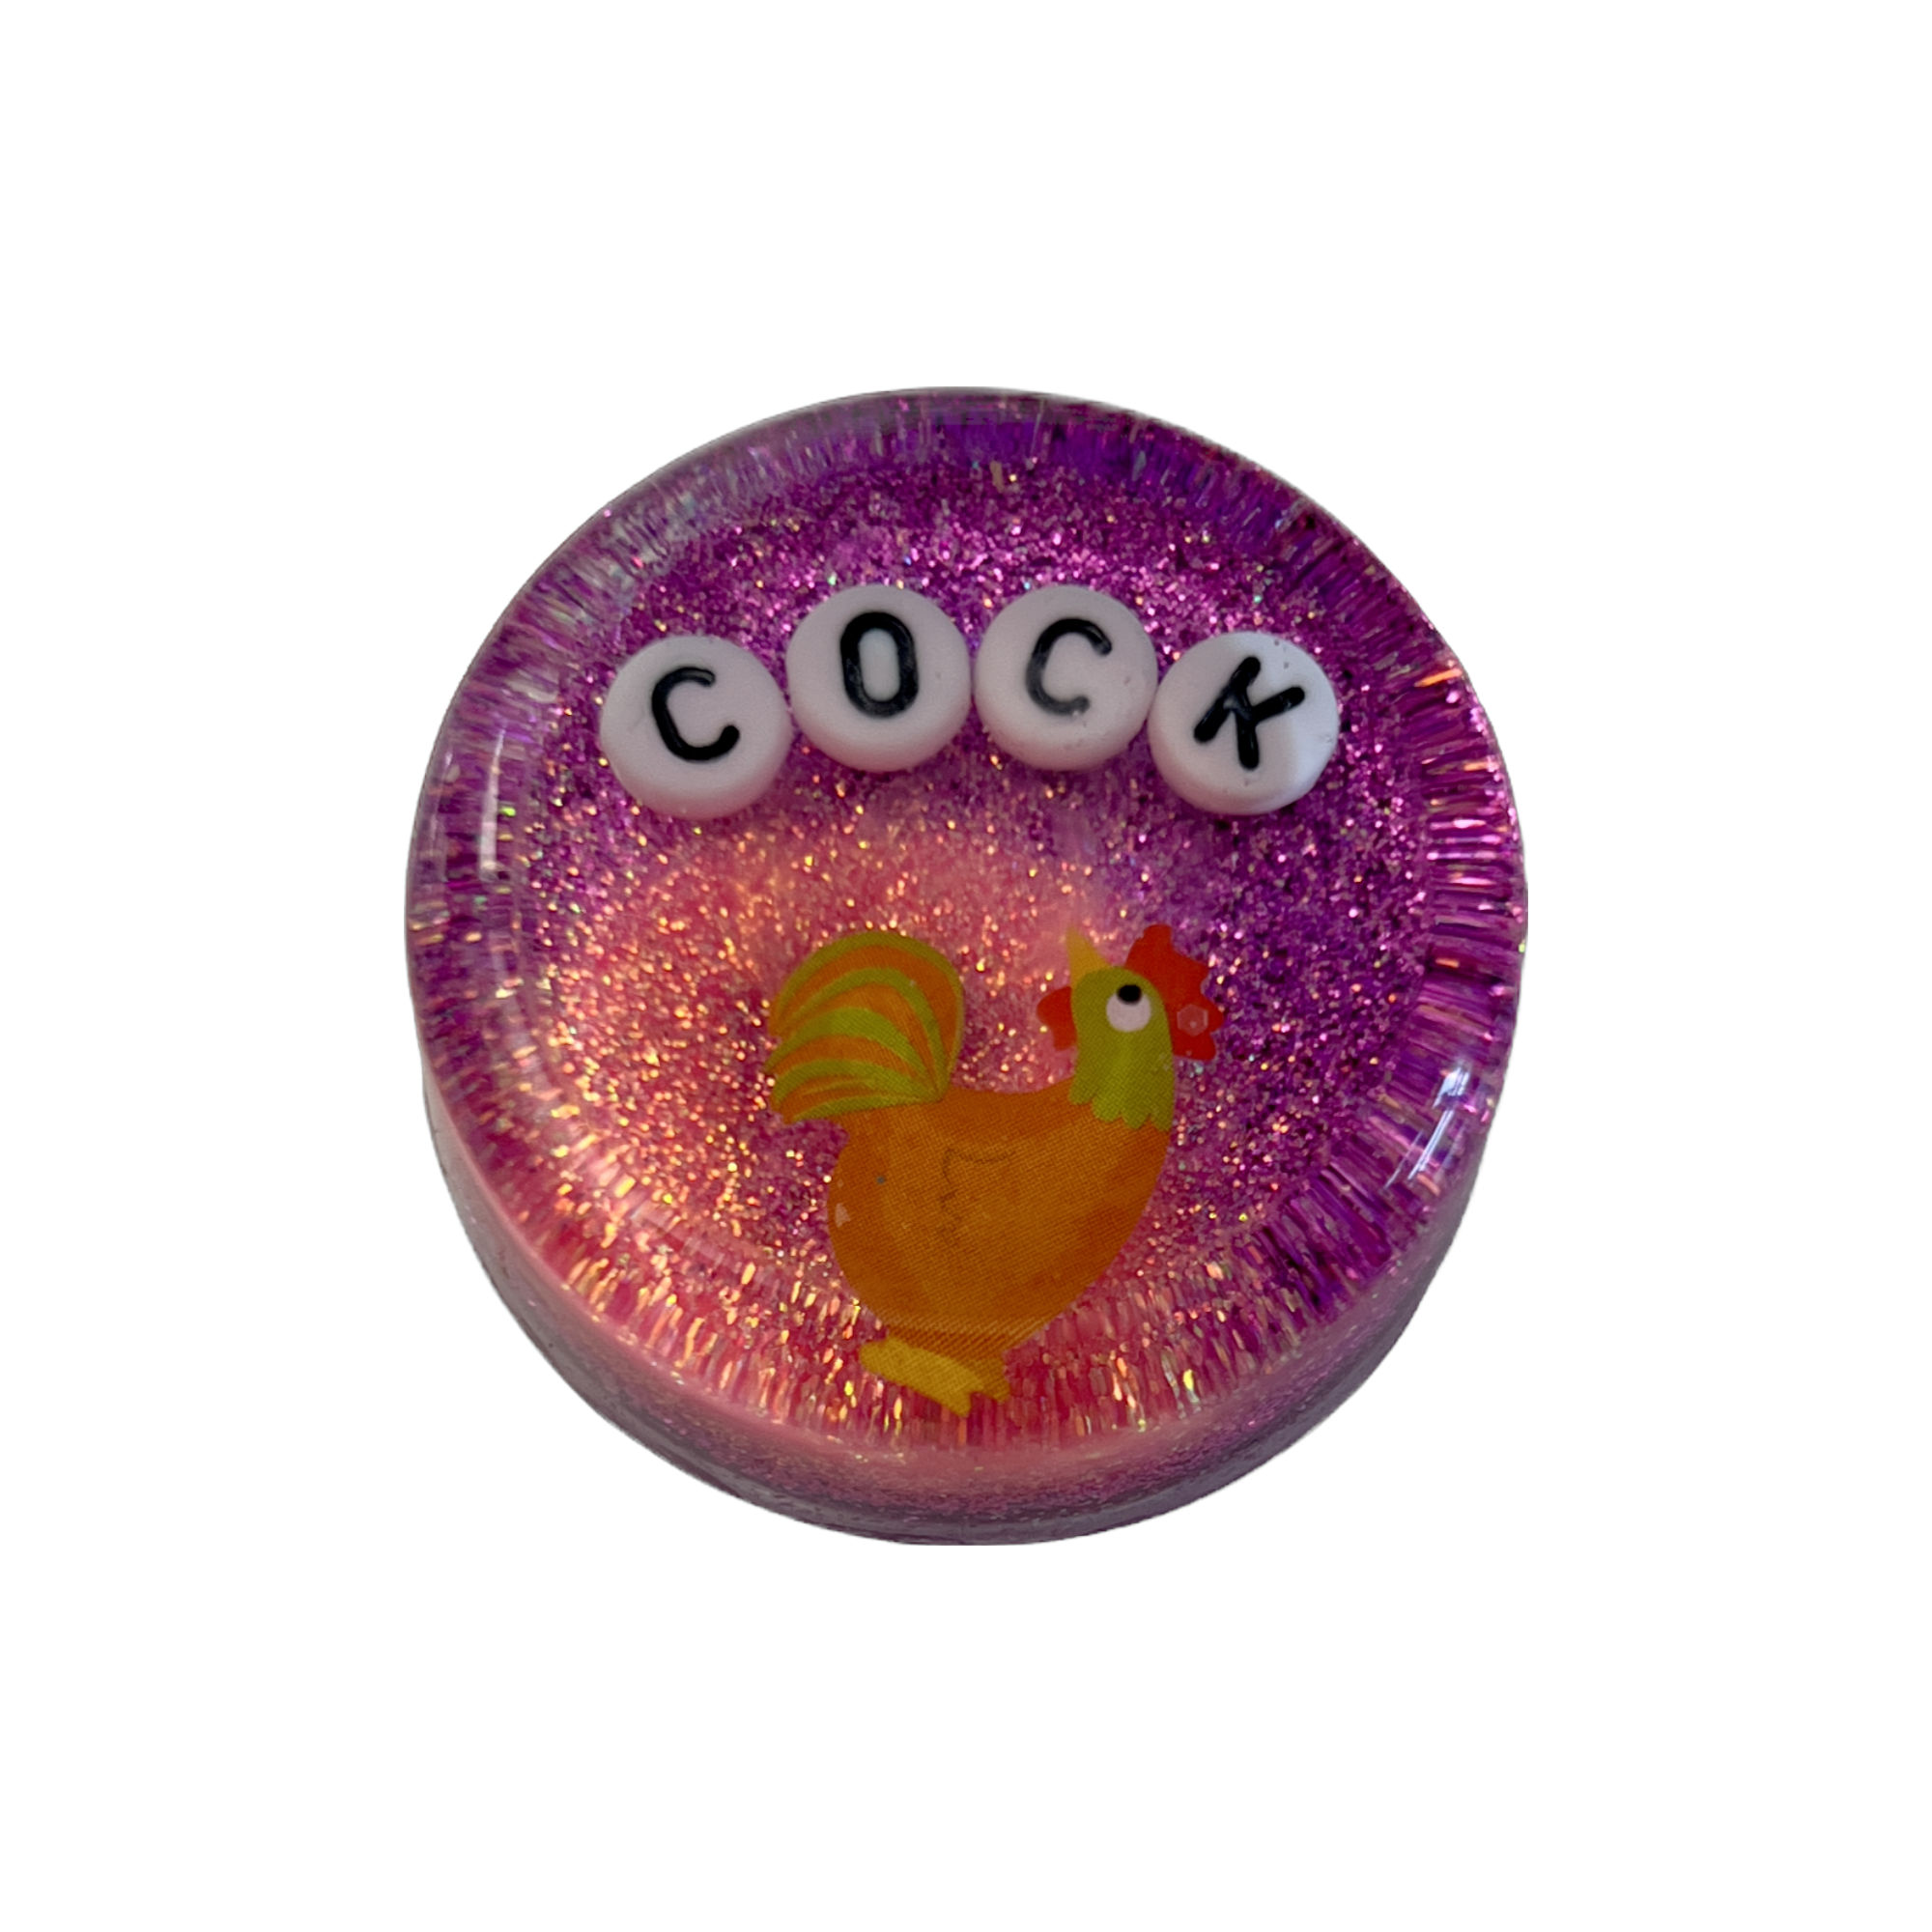 Cock - Shower Art - READY TO SHIP